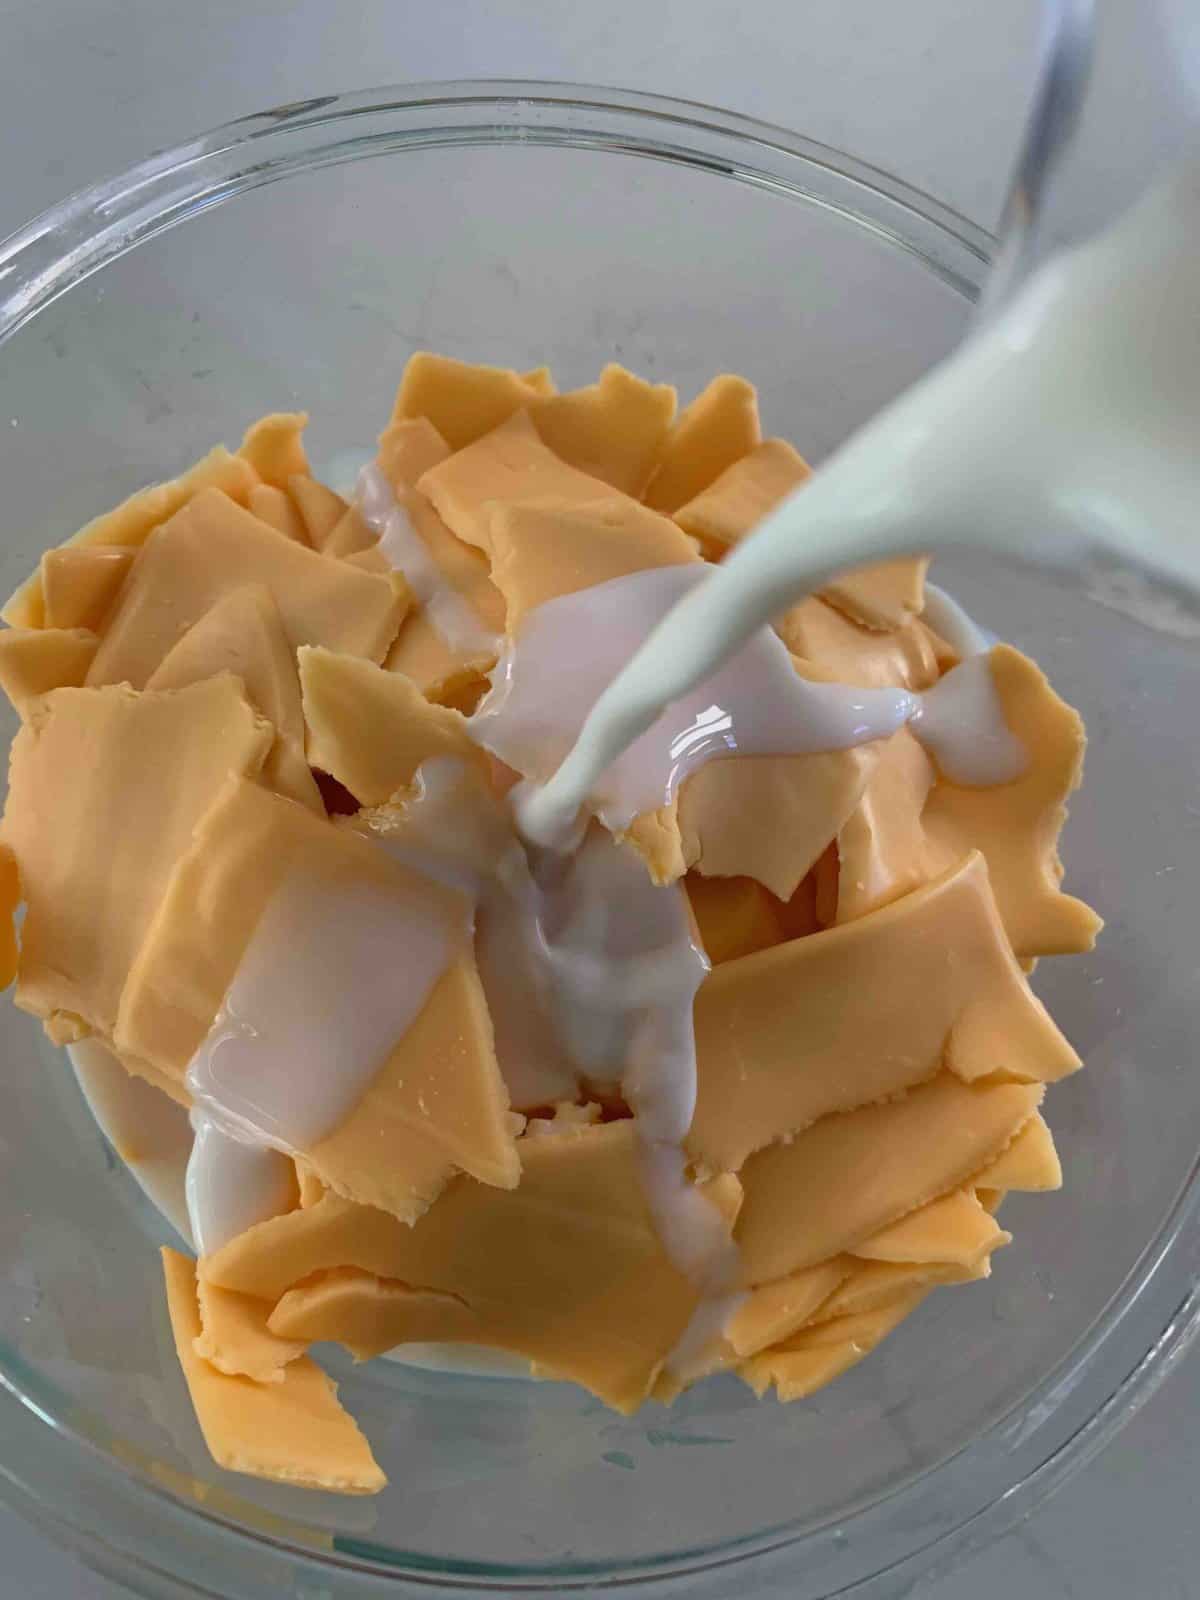 top view of milk being poured into a bowl of broken pieces of American cheese